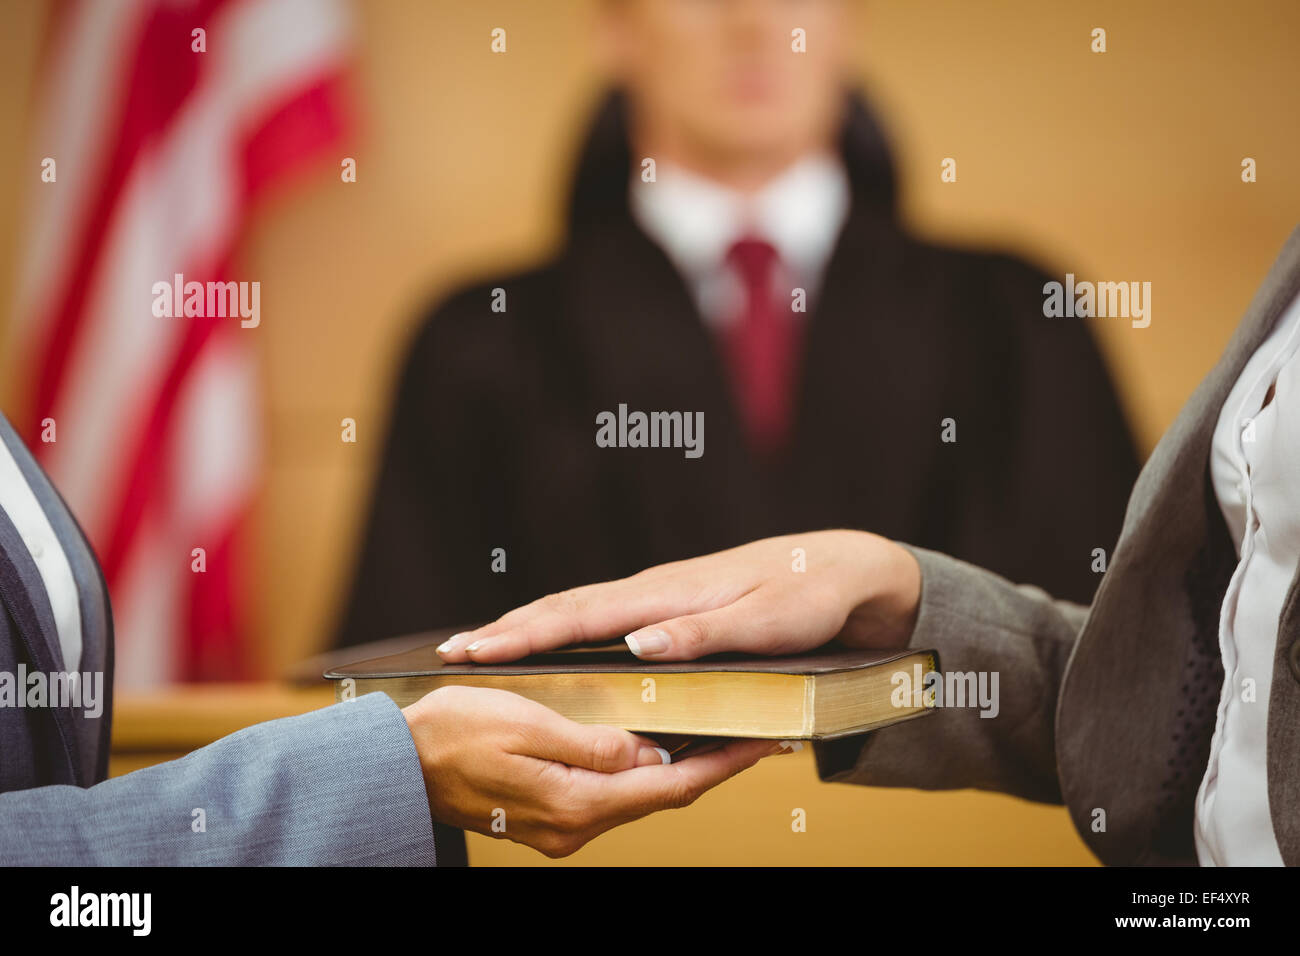 Witness swearing on the bible telling the truth Stock Photo